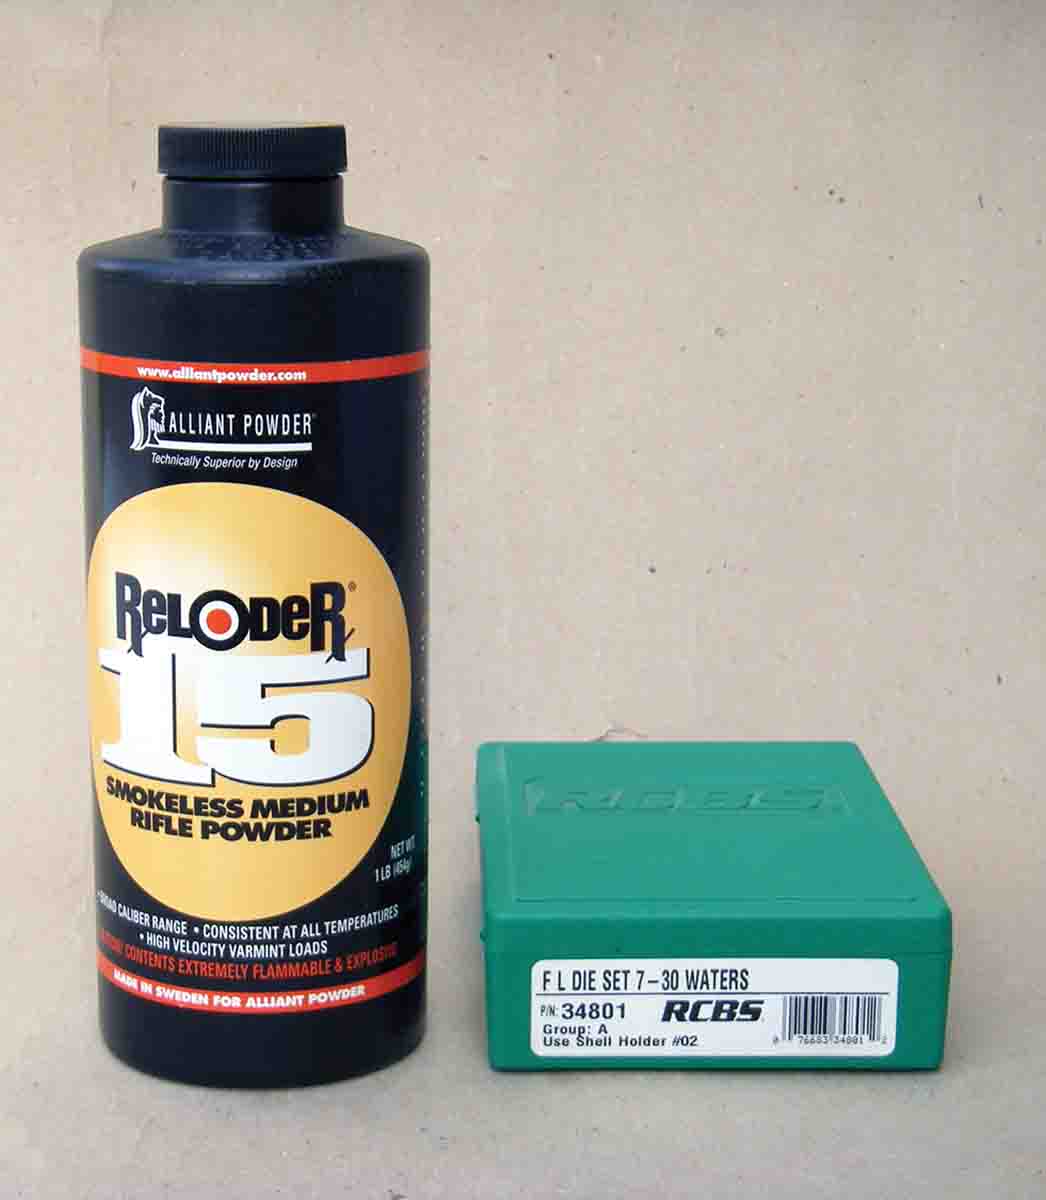 Alliant Reloder 15 is a good powder for handloading the 7-30 Waters.